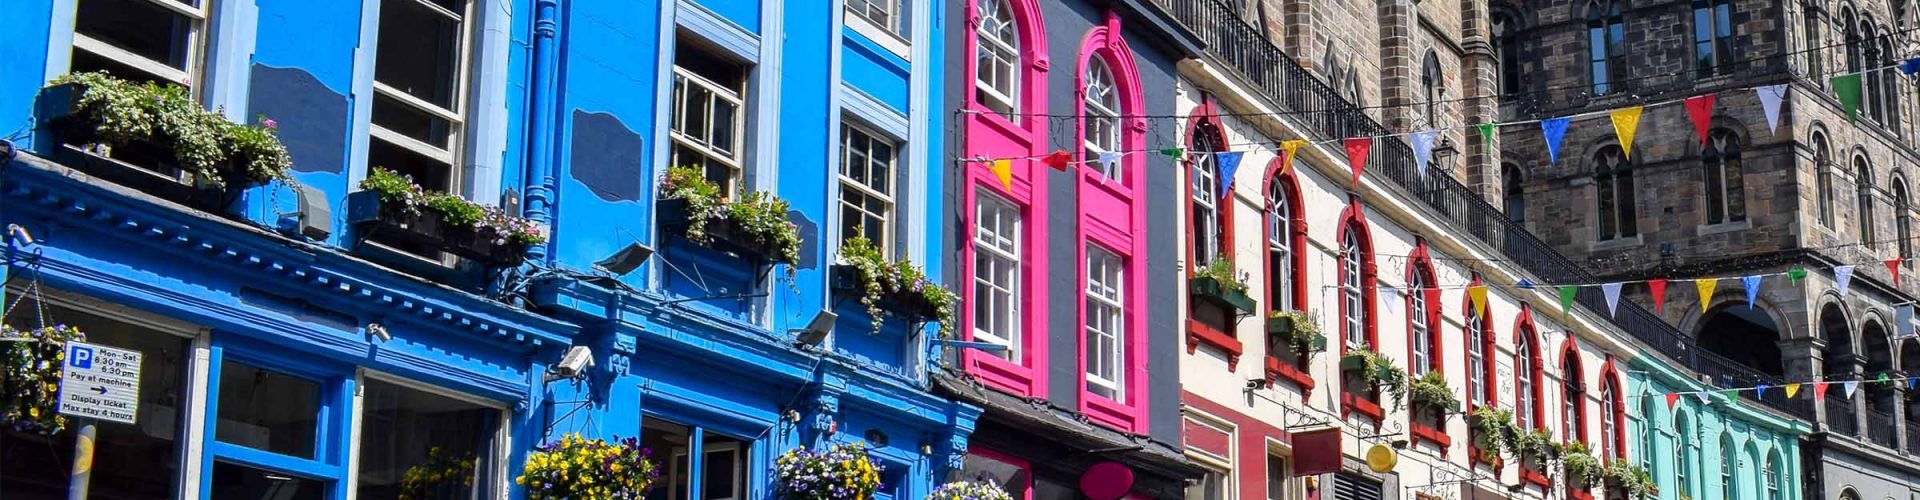 The colourful exterior of the buildings and shops on Victoria Street in Edinburgh